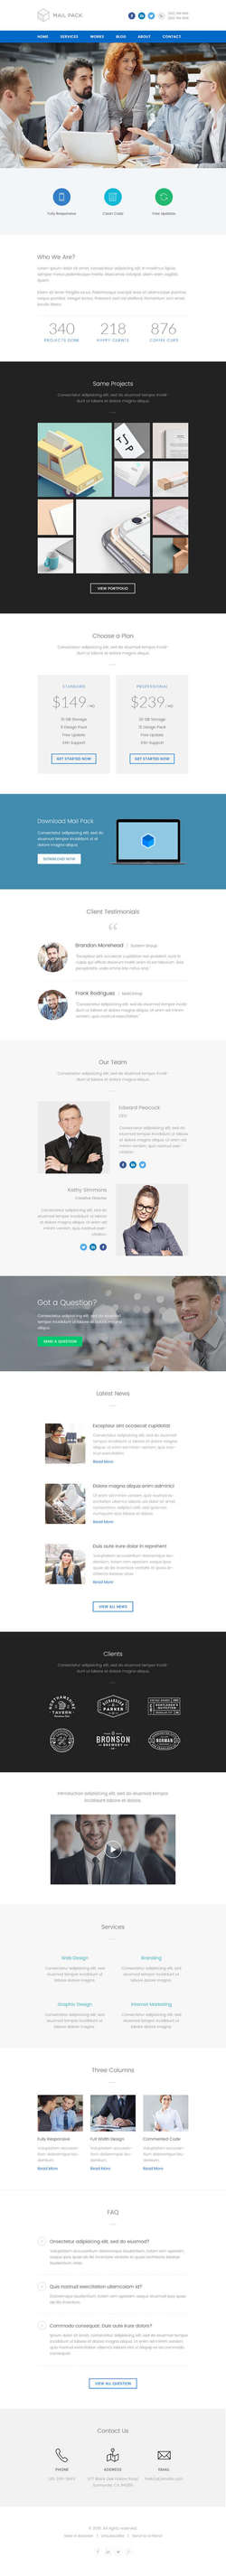 Mail Pack - Responsive Email Template